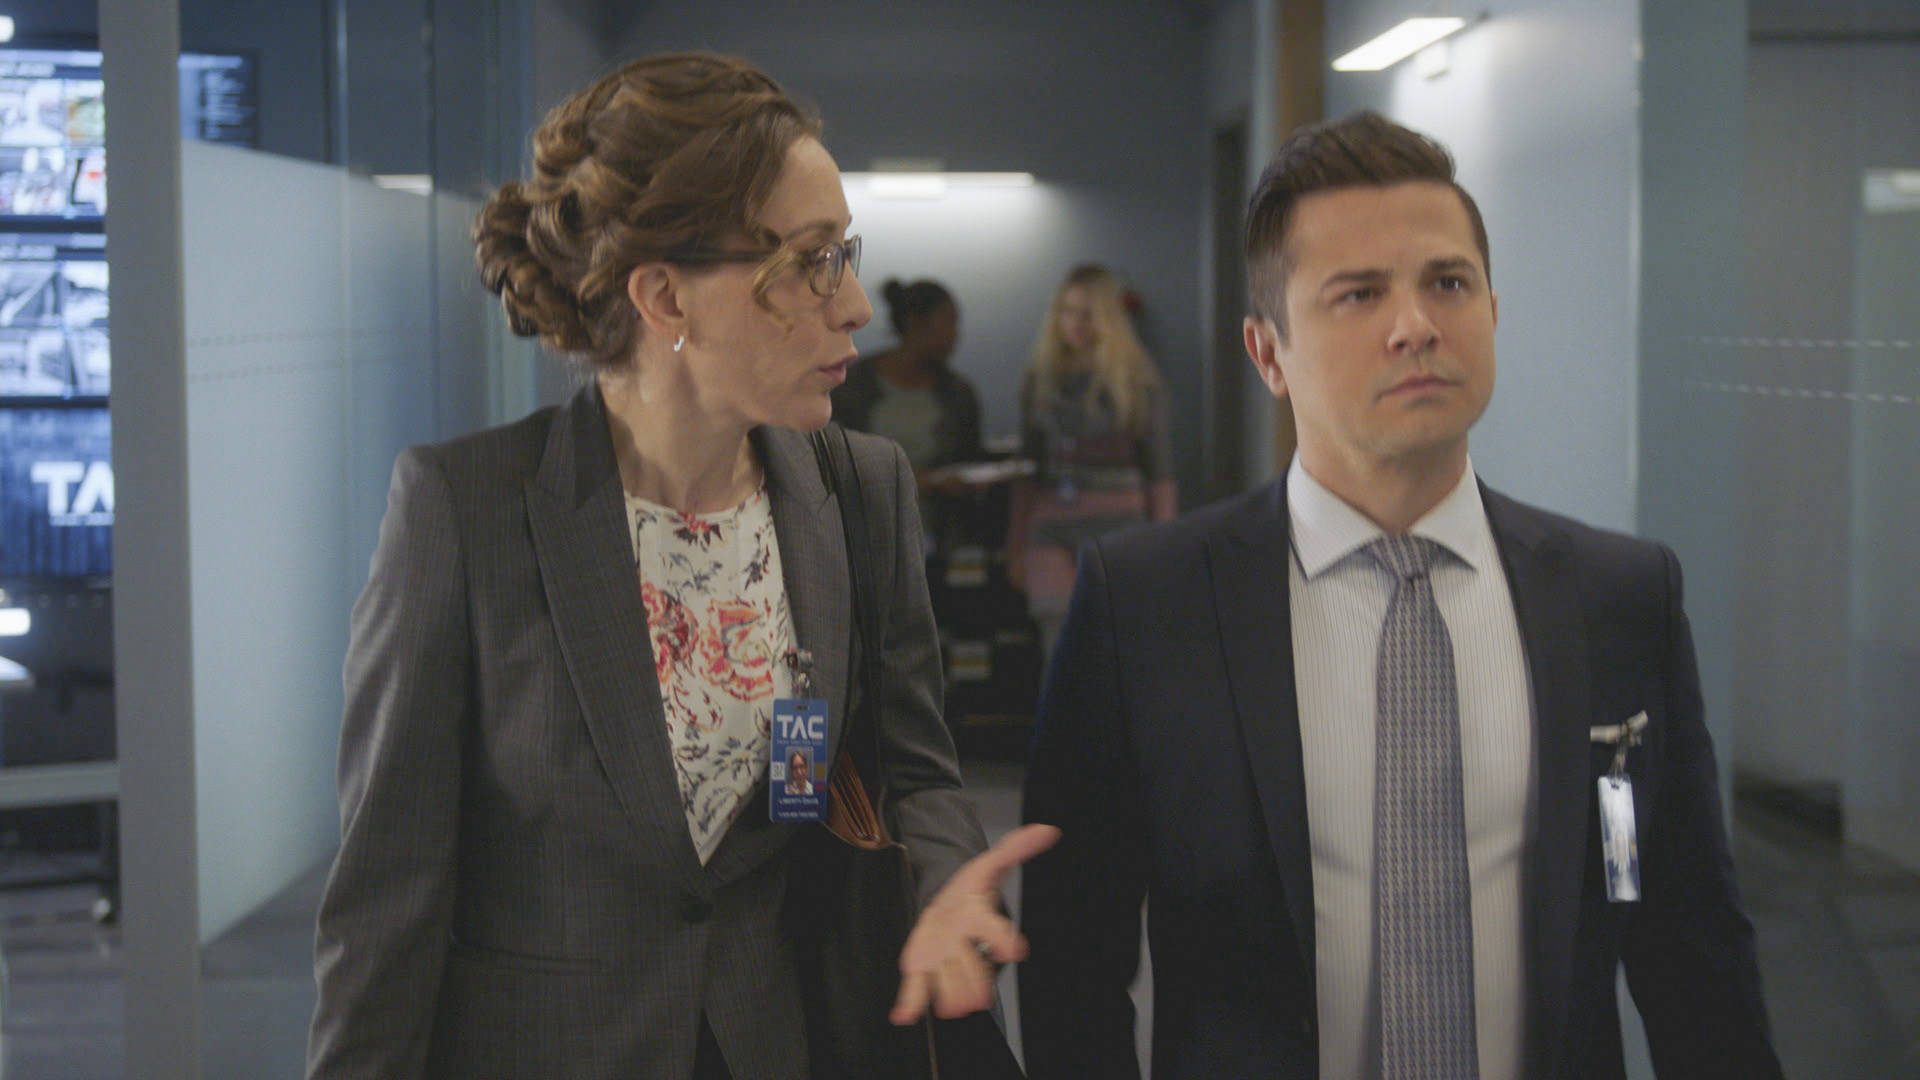 Will Bull's Client Have To Learn His Lesson The Hard Way?